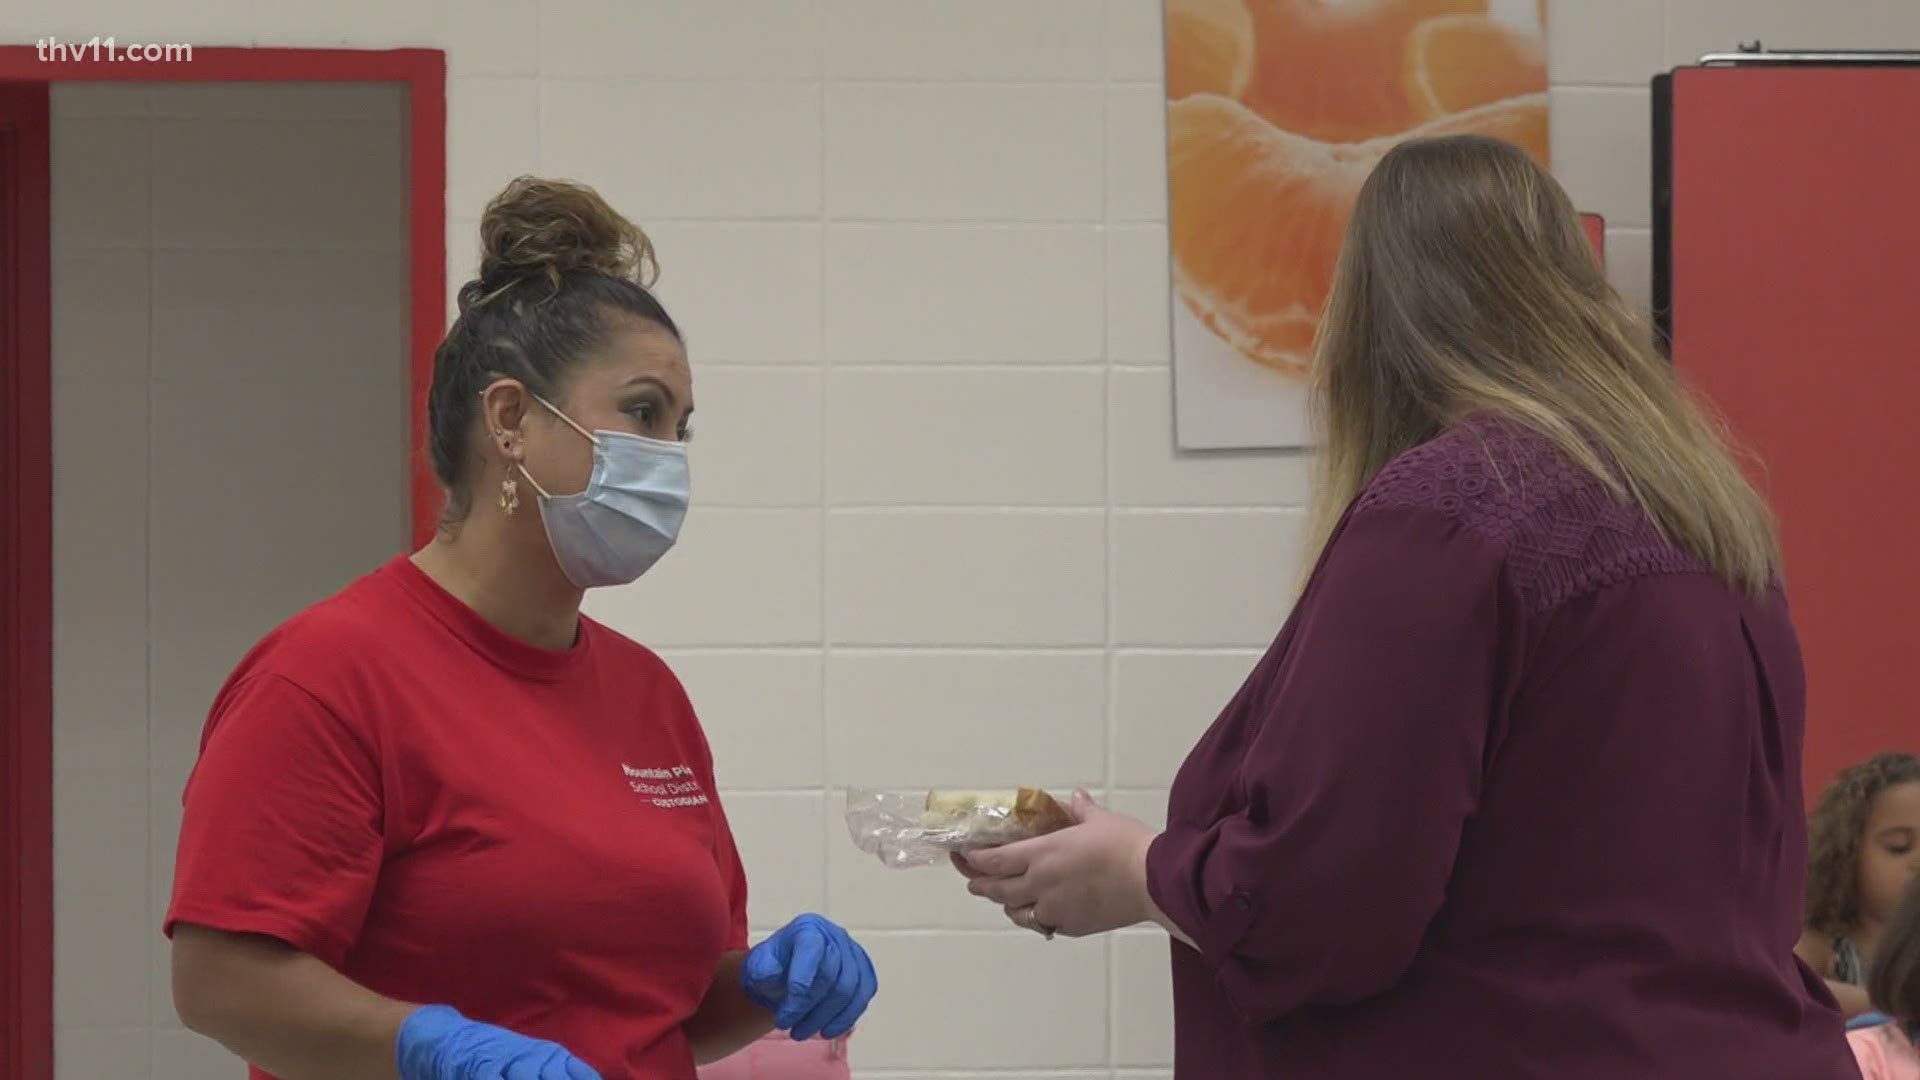 A cafeteria worker tested positive, sending all other workers in quarantine in Mountain Pine. Teachers and staff are volunteering to help serve meals.